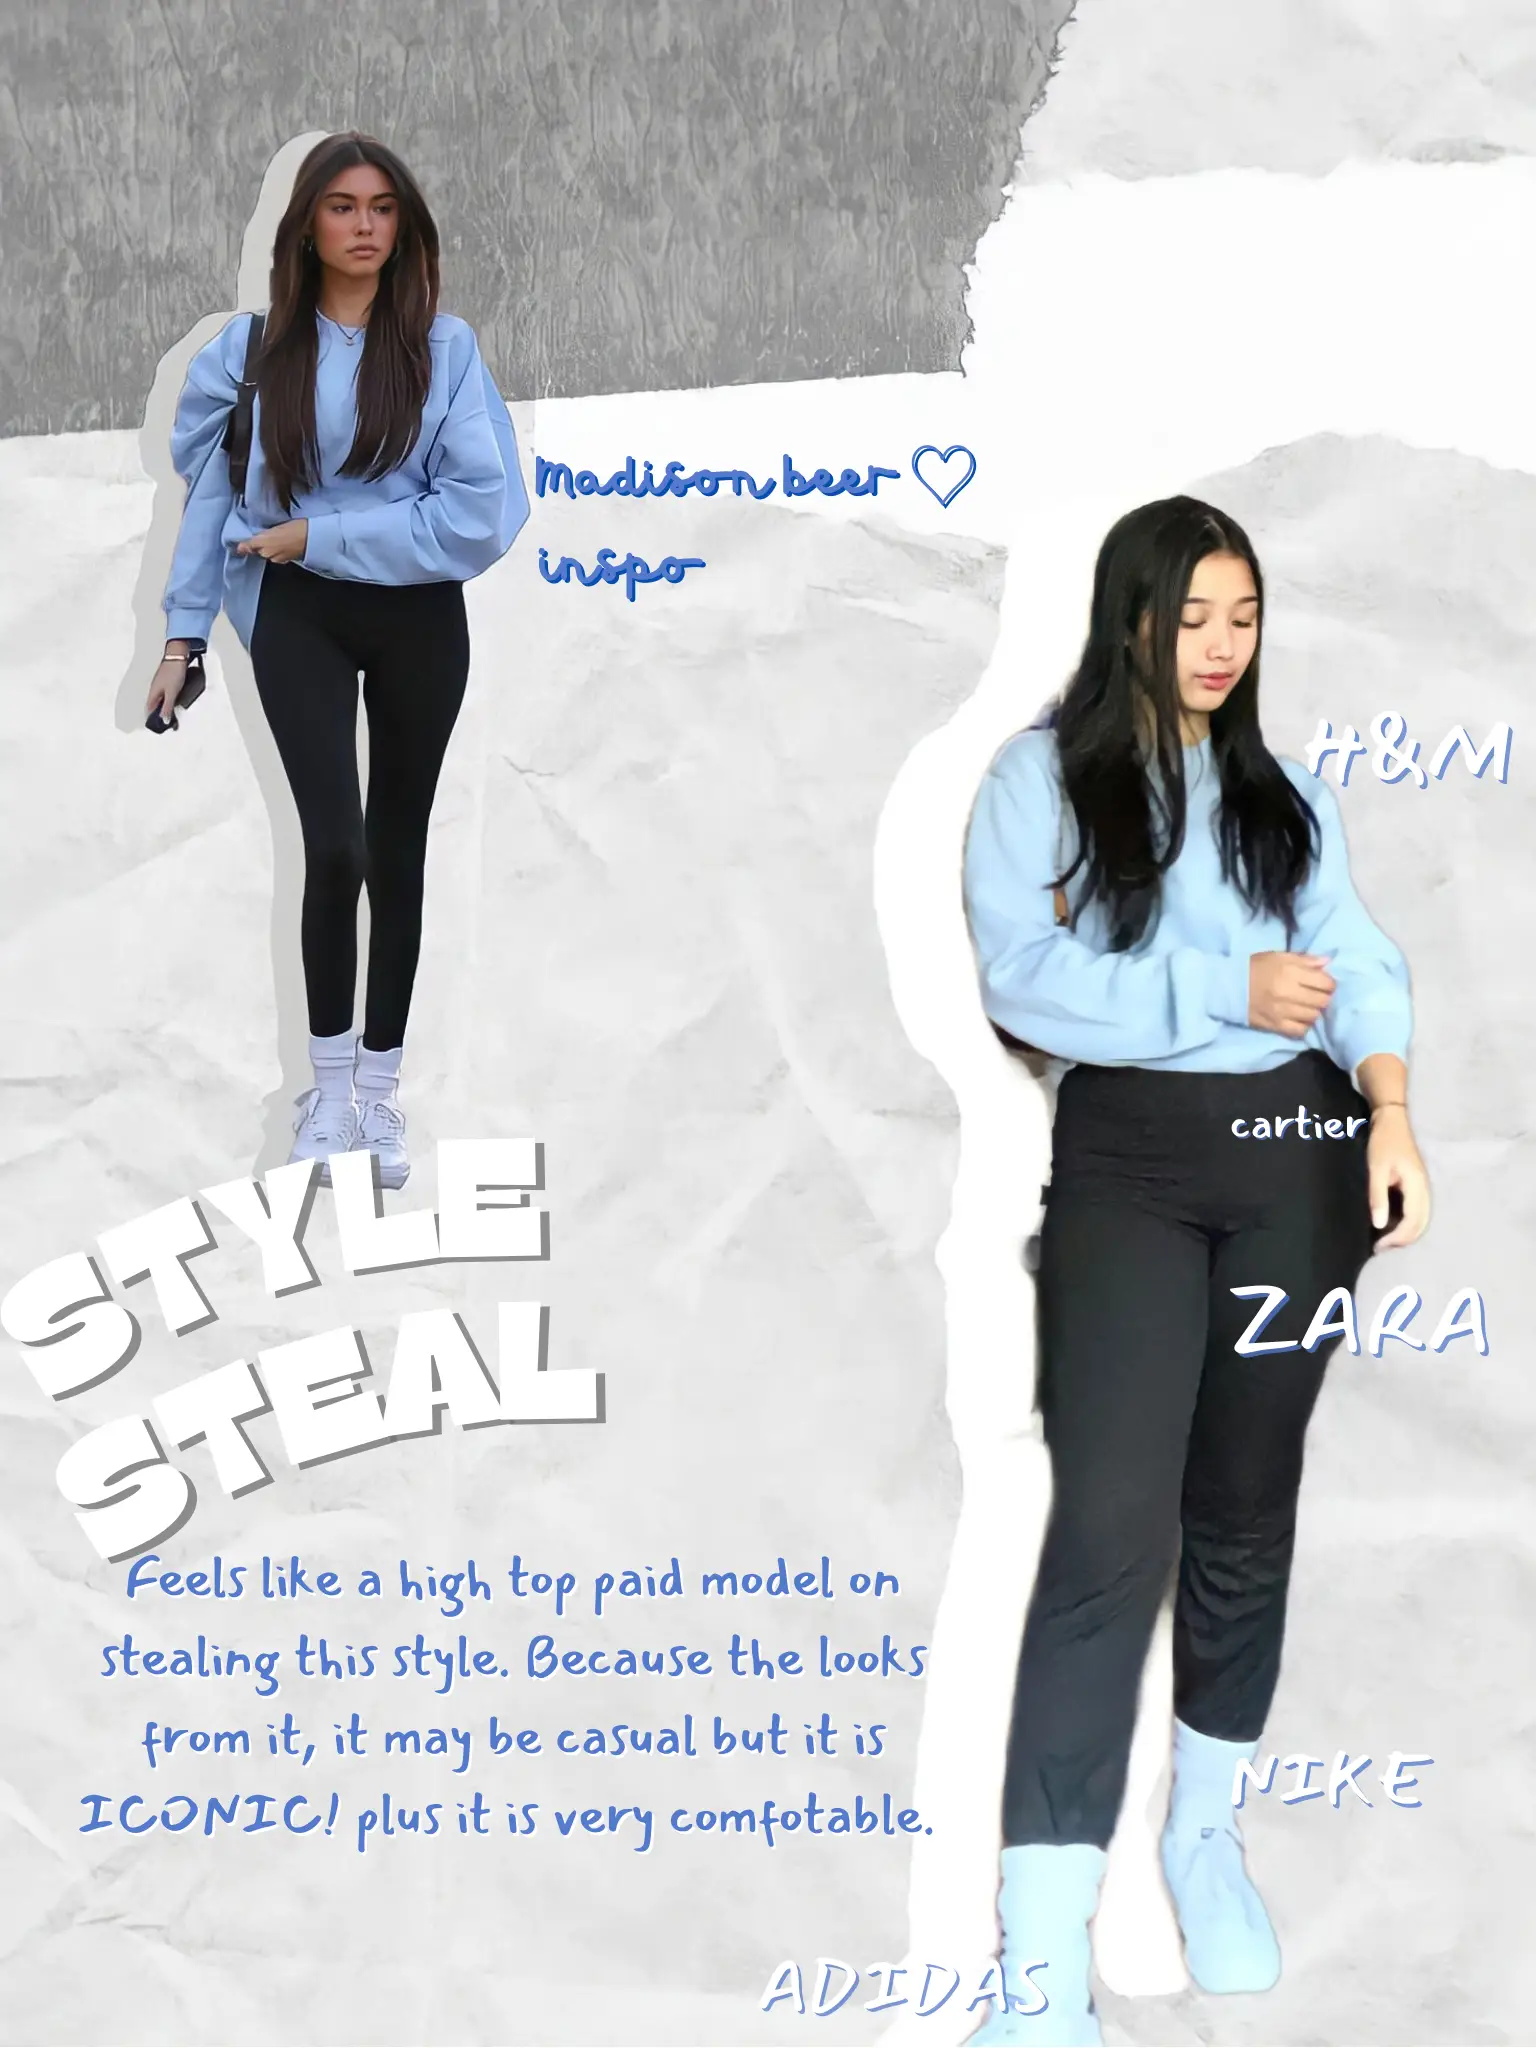 Madison Beer looks fab in a blue crop top and black leggings as